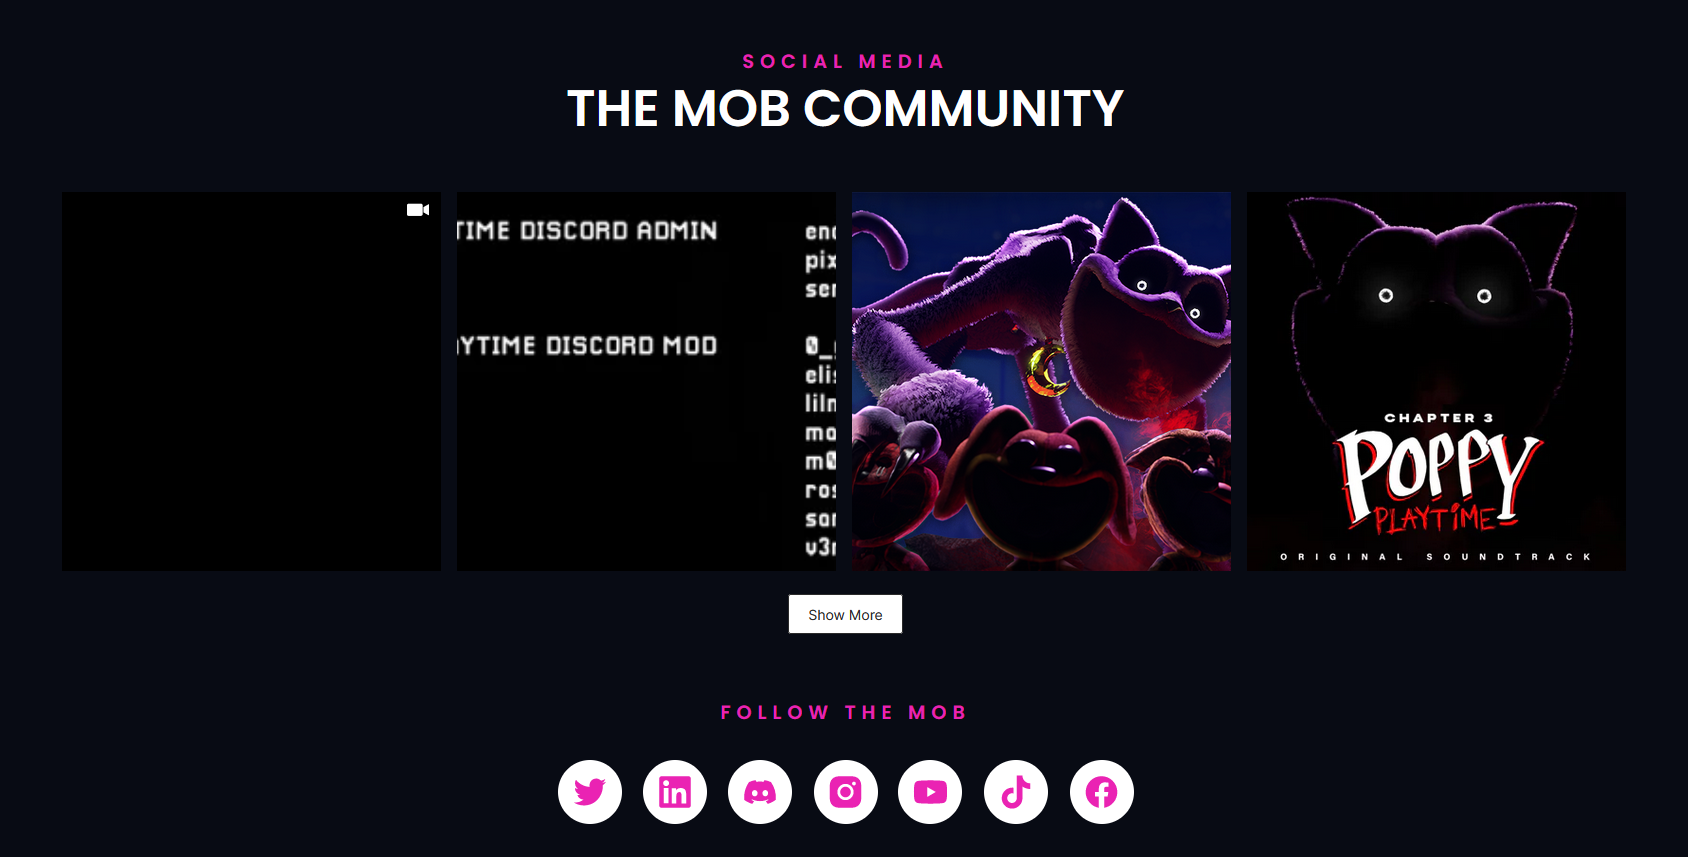 Screenshot from the official Mob Entertainment website showing seven links to different social media platforms